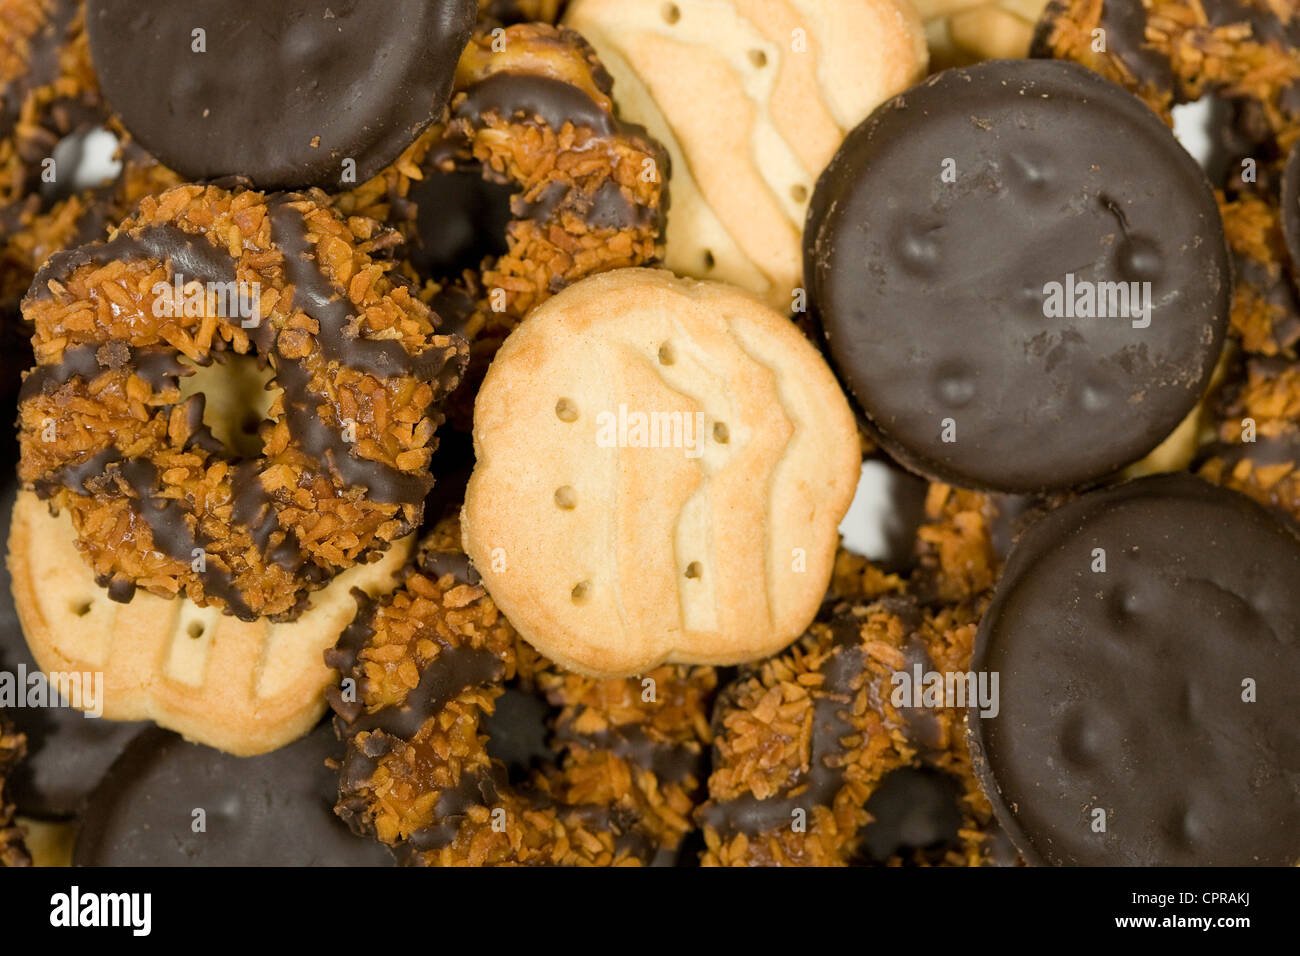 Thin Mints, Trefoils and Samoas Girl Scout cookies.  Stock Photo